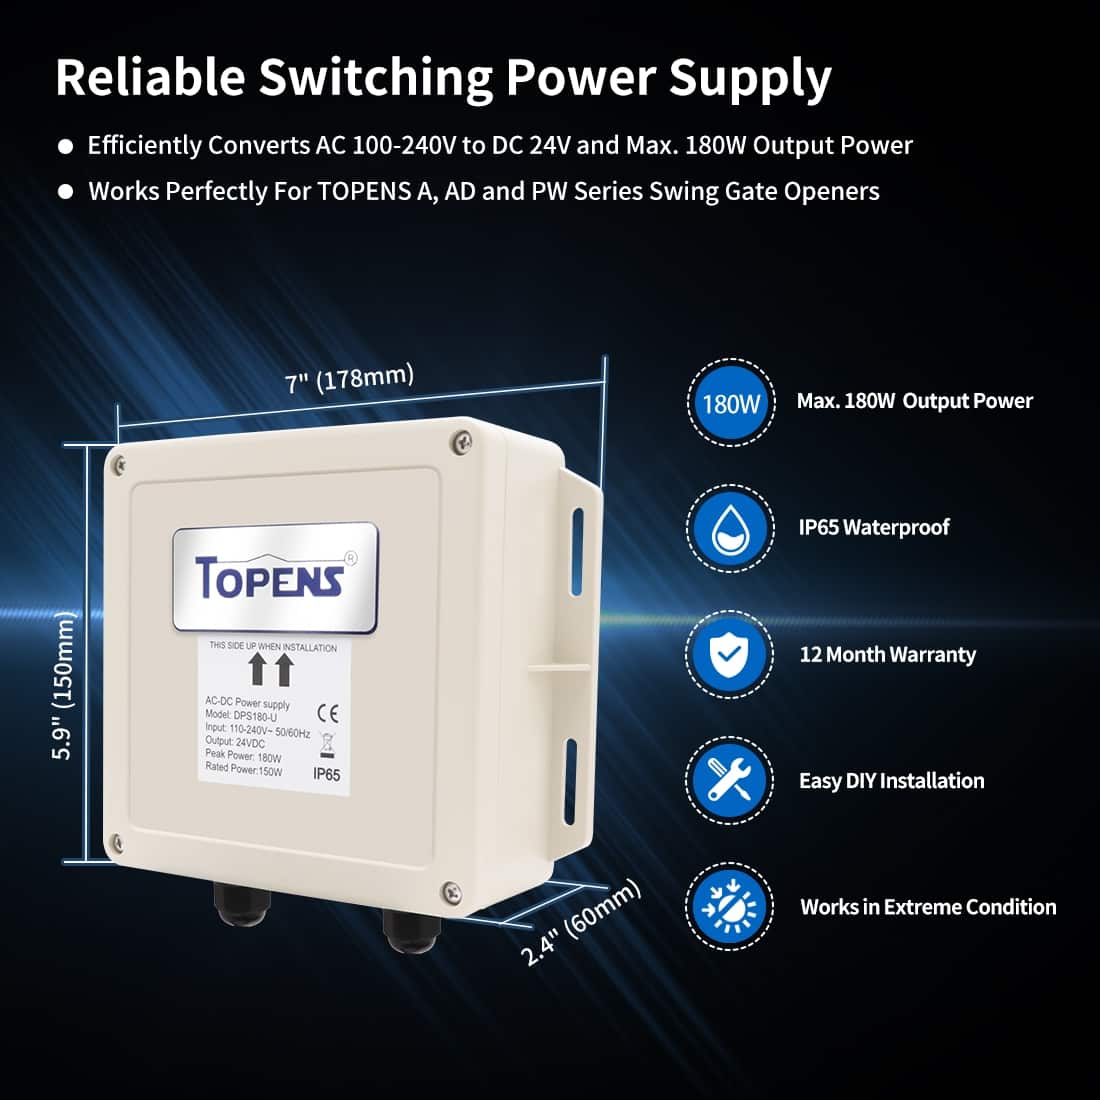 DPS180-U AC to DC Power Supply of Reliable Performance